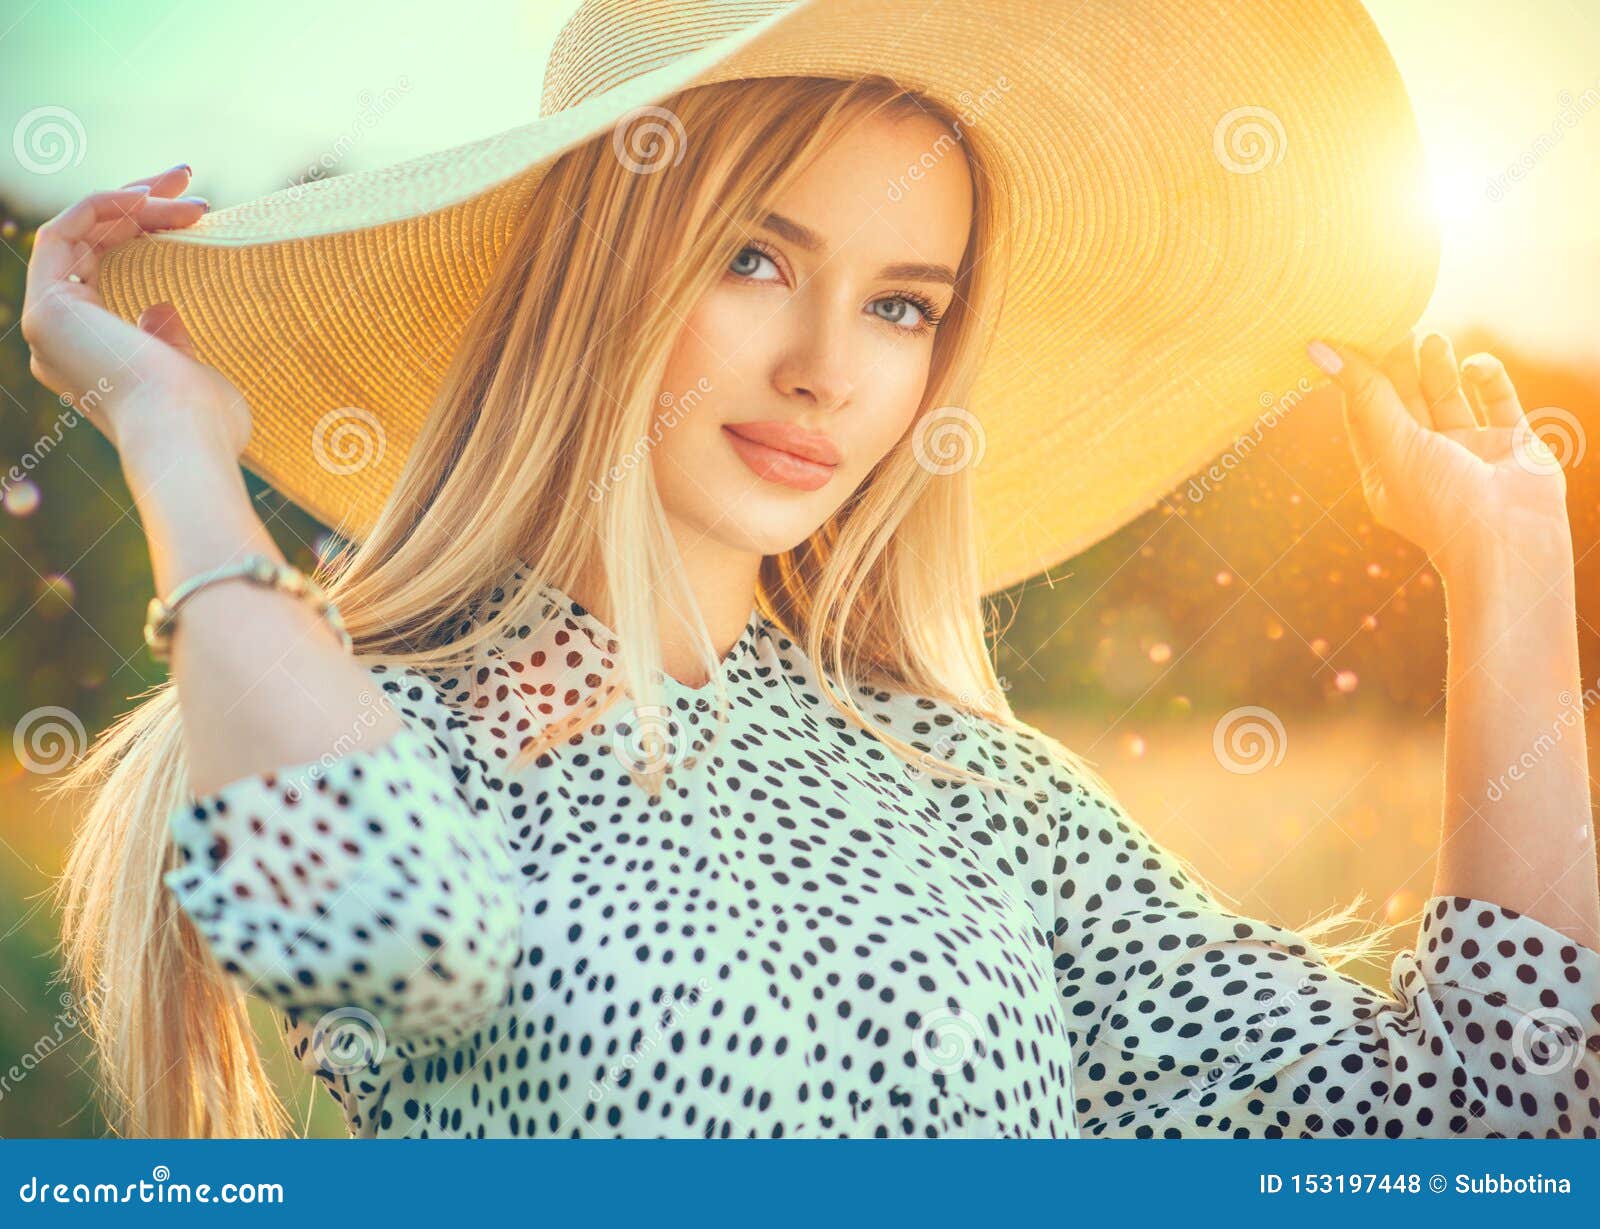 beautiful model girl posing on a field, enjoying nature outdoors in wide brimmed straw hat. beauty blonde young woman